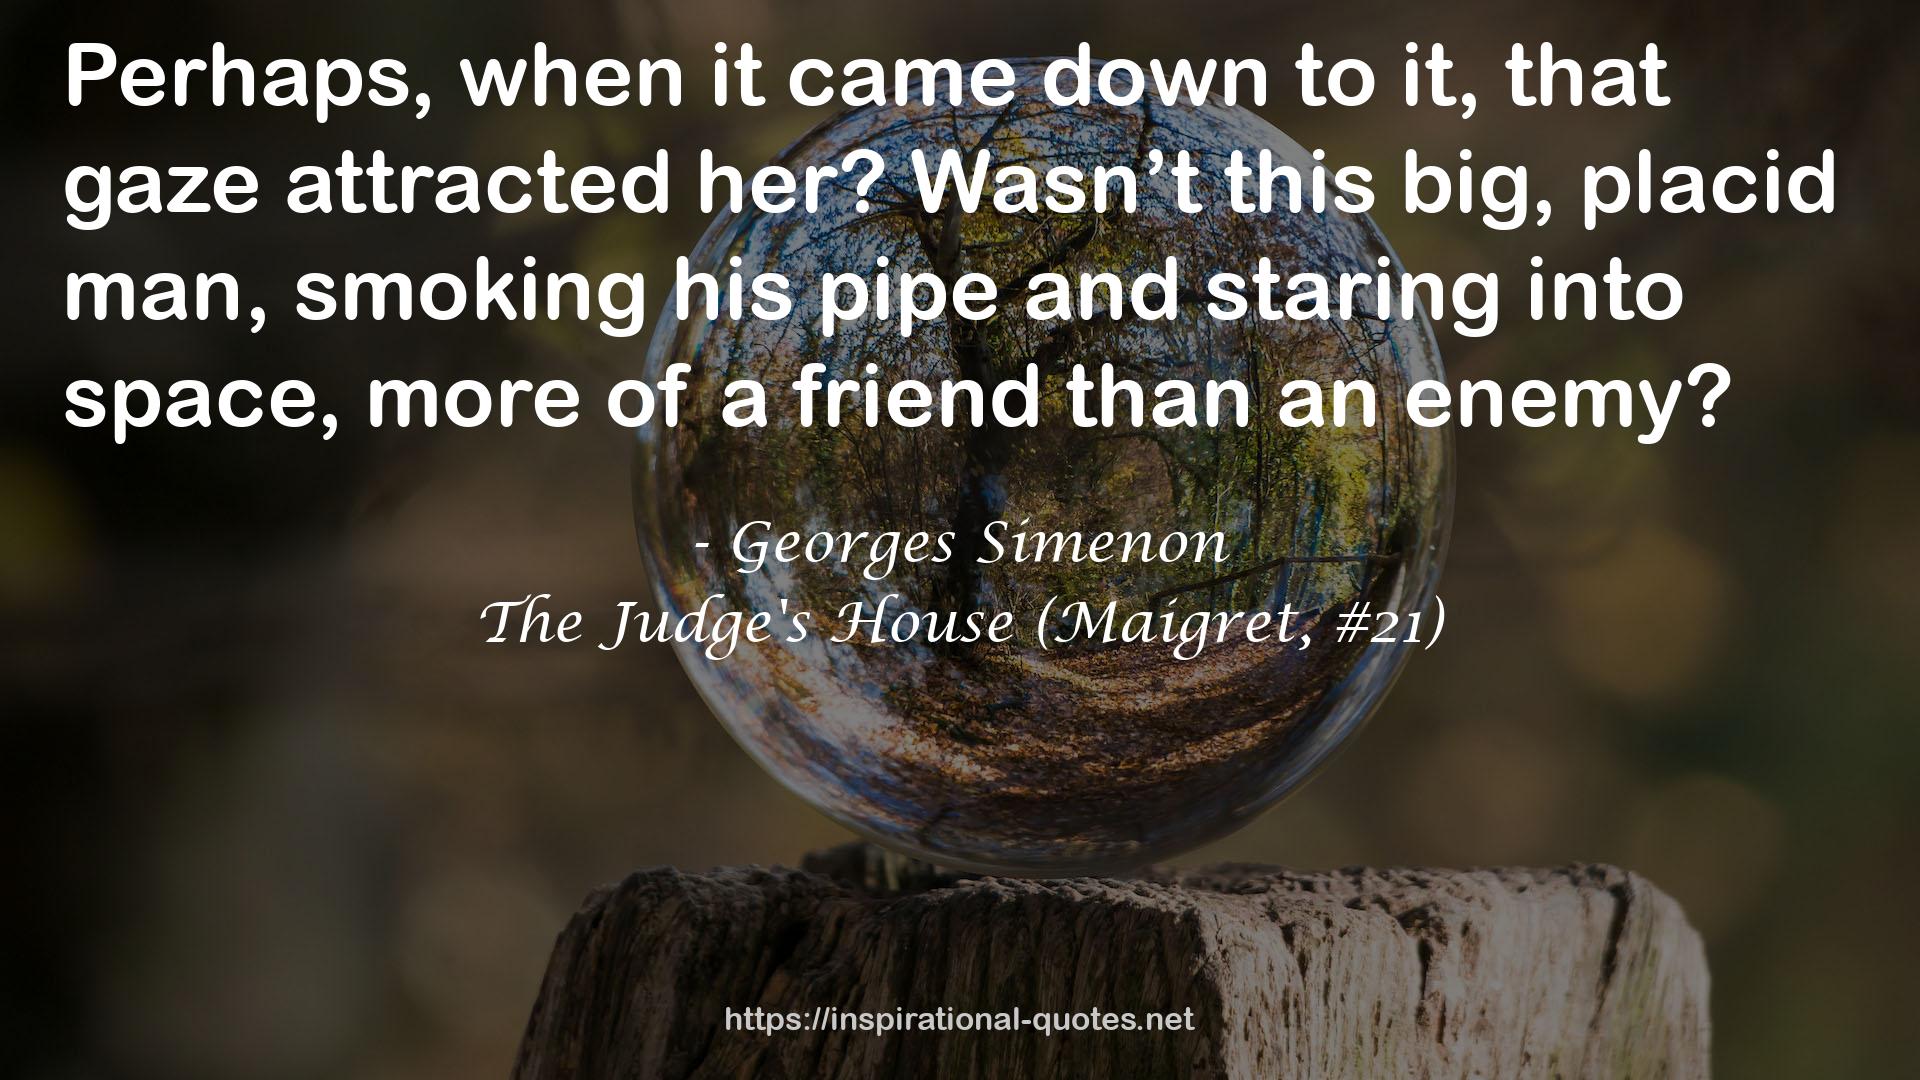 The Judge's House (Maigret, #21) QUOTES